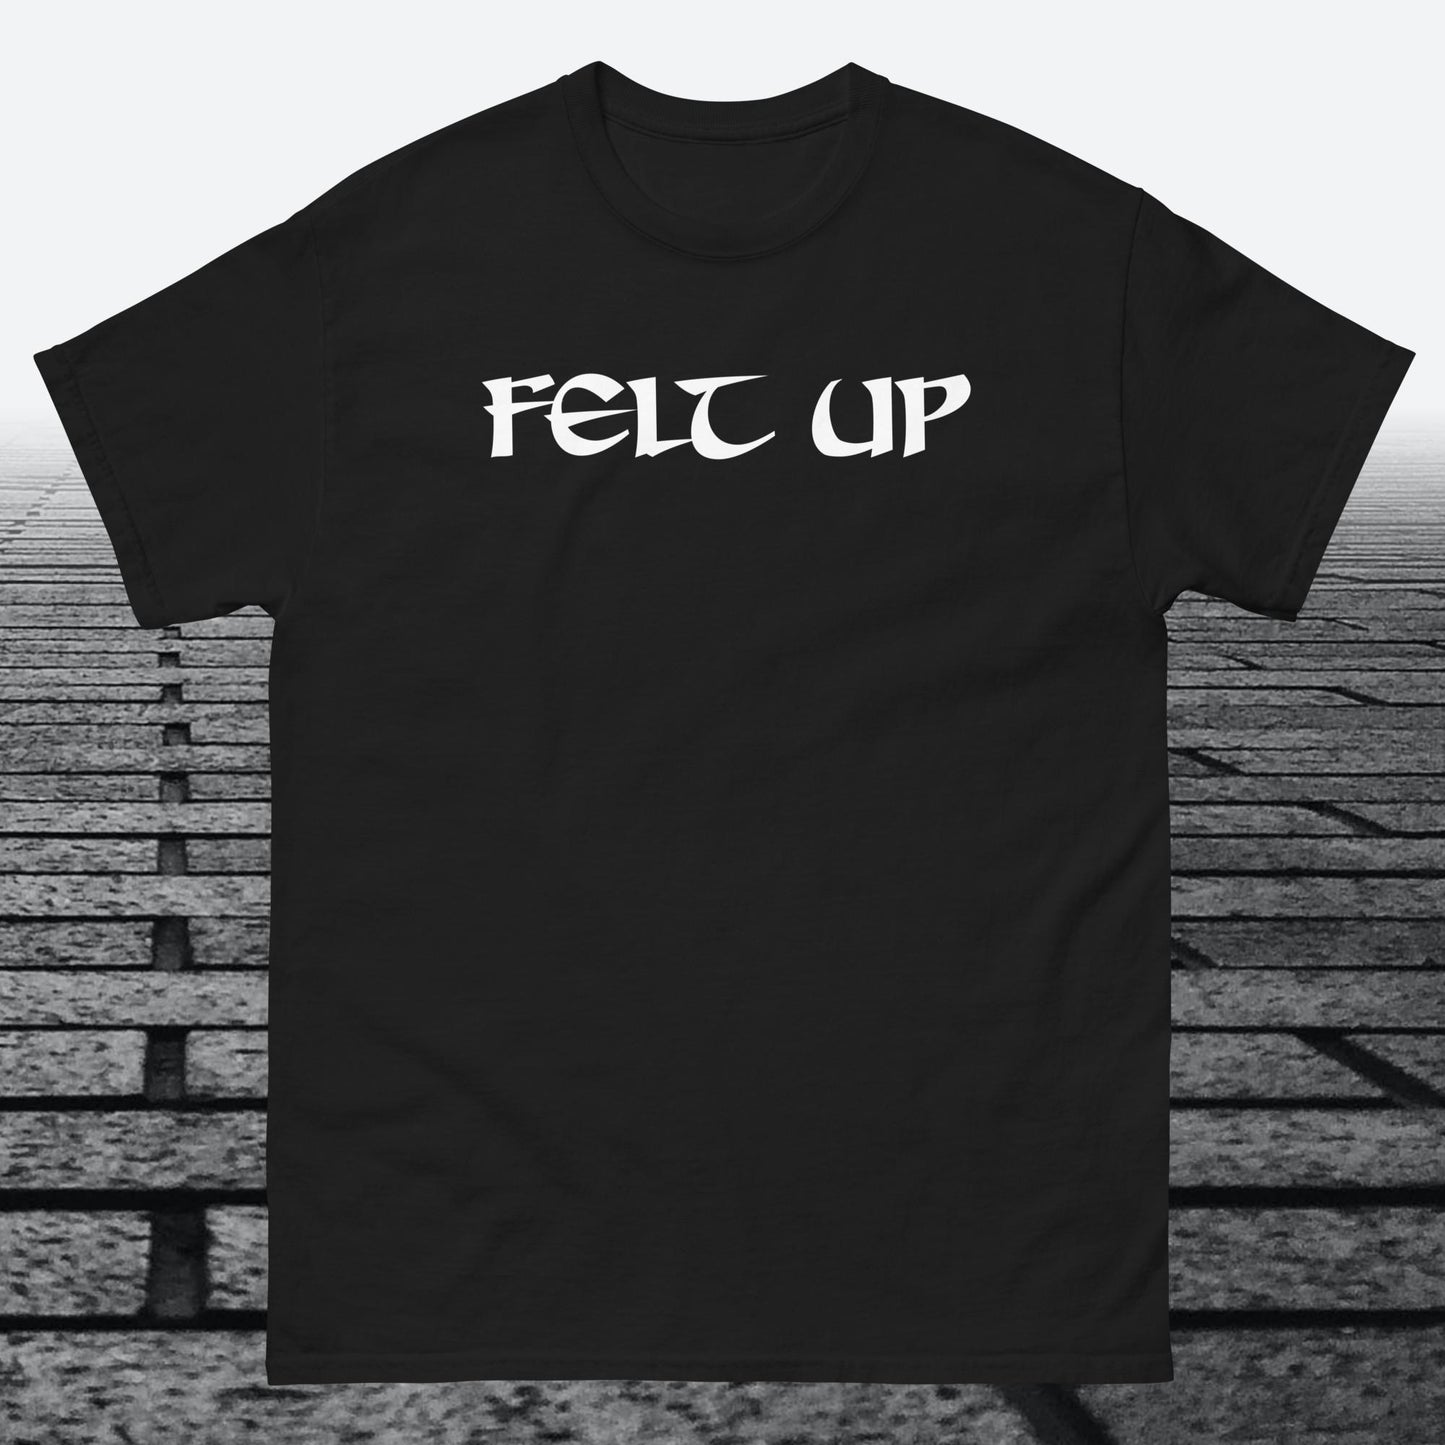 Felt Up, with logo on the back, Cotton t-shirt